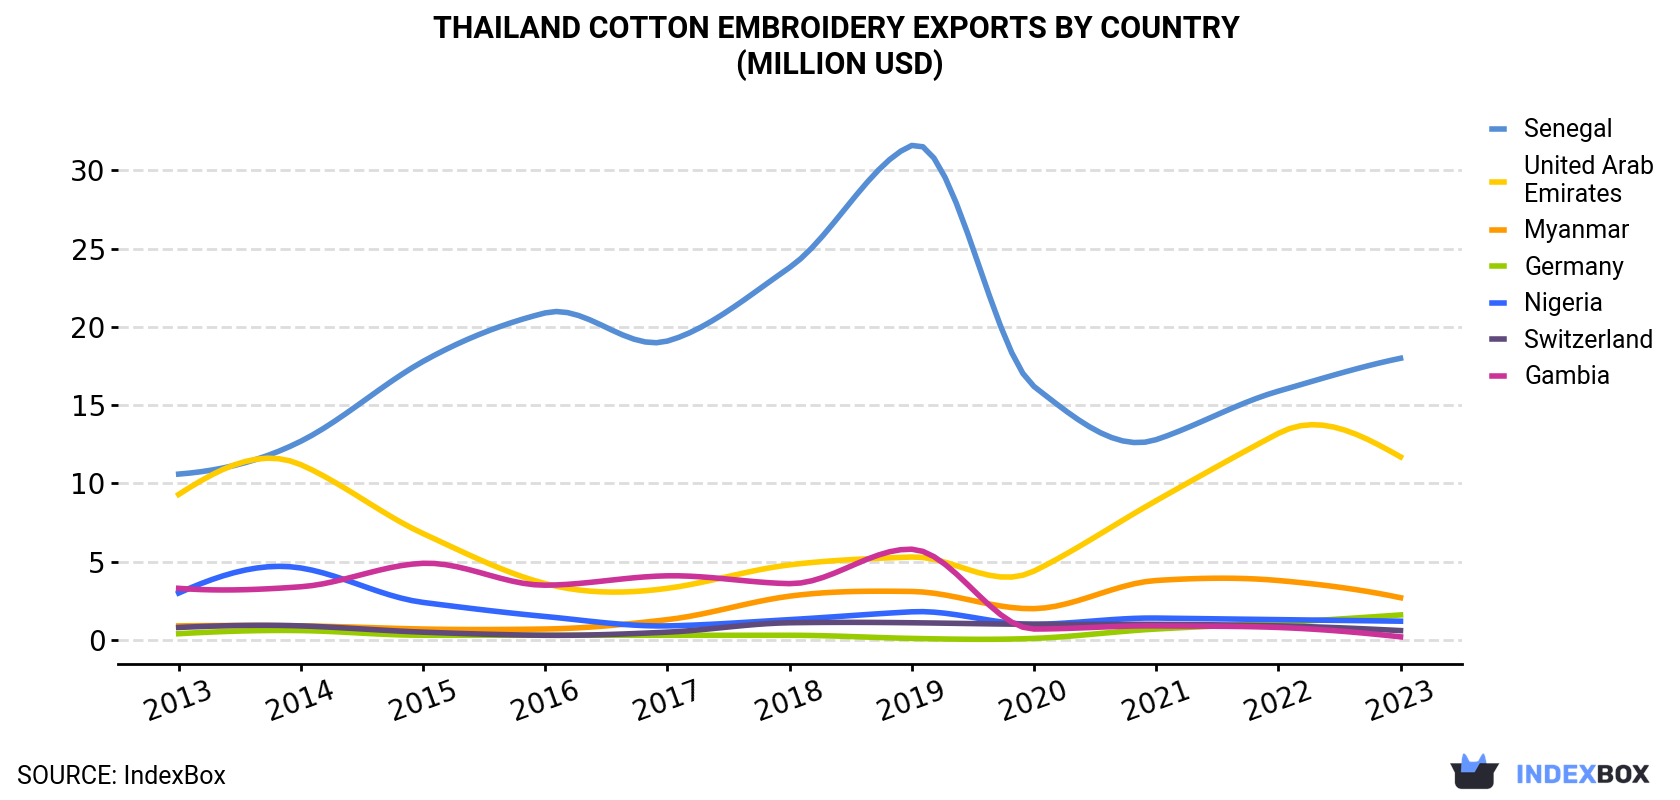 Thailand Cotton Embroidery Exports By Country (Million USD)